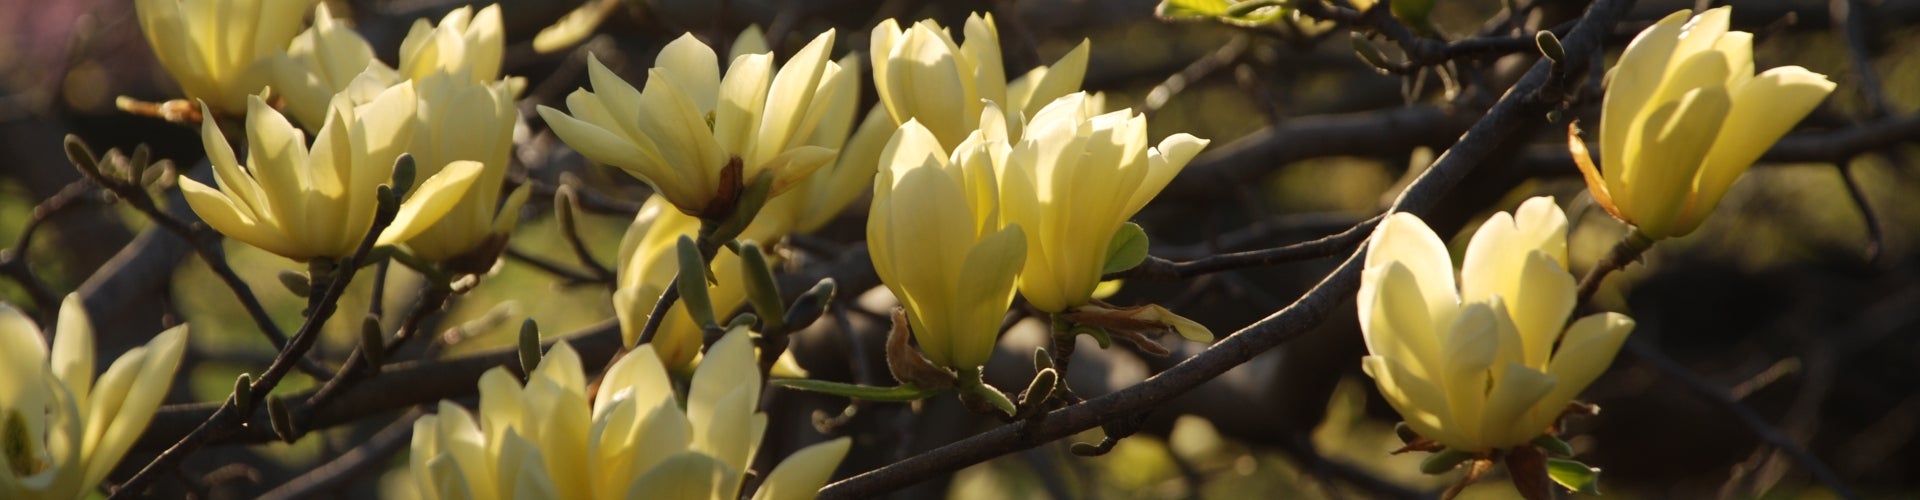 Yellow flowers growing on the branches of a magnolia tree.